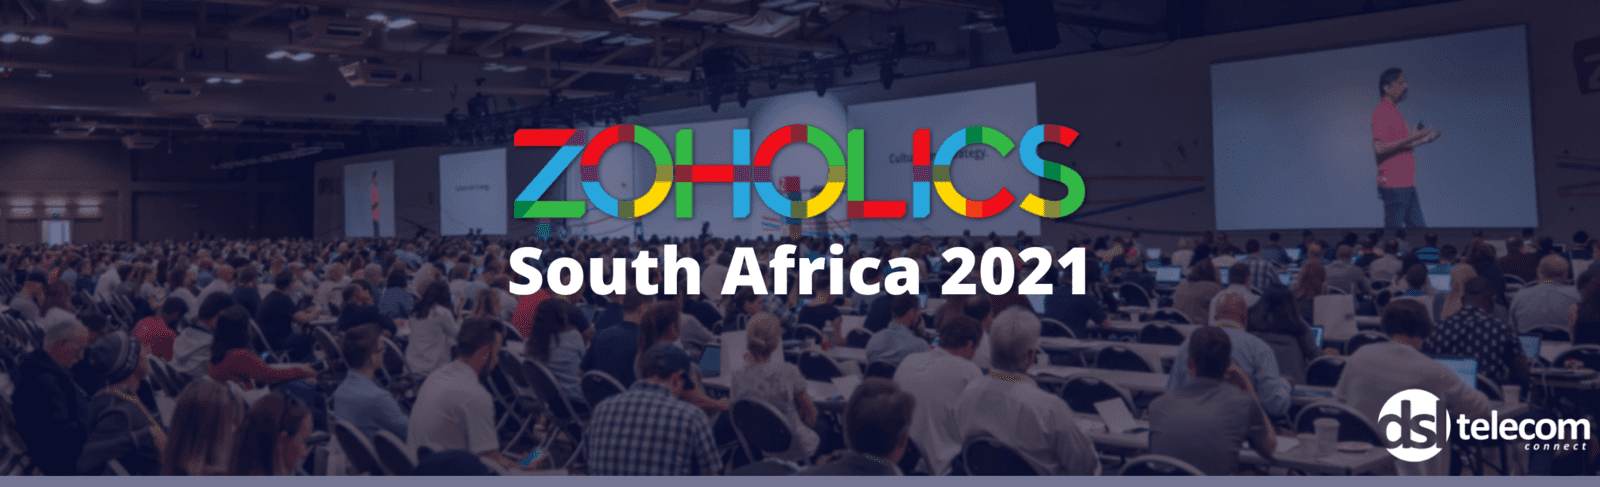 Zoholics South Africa 2021 - Zoho's annual user conference